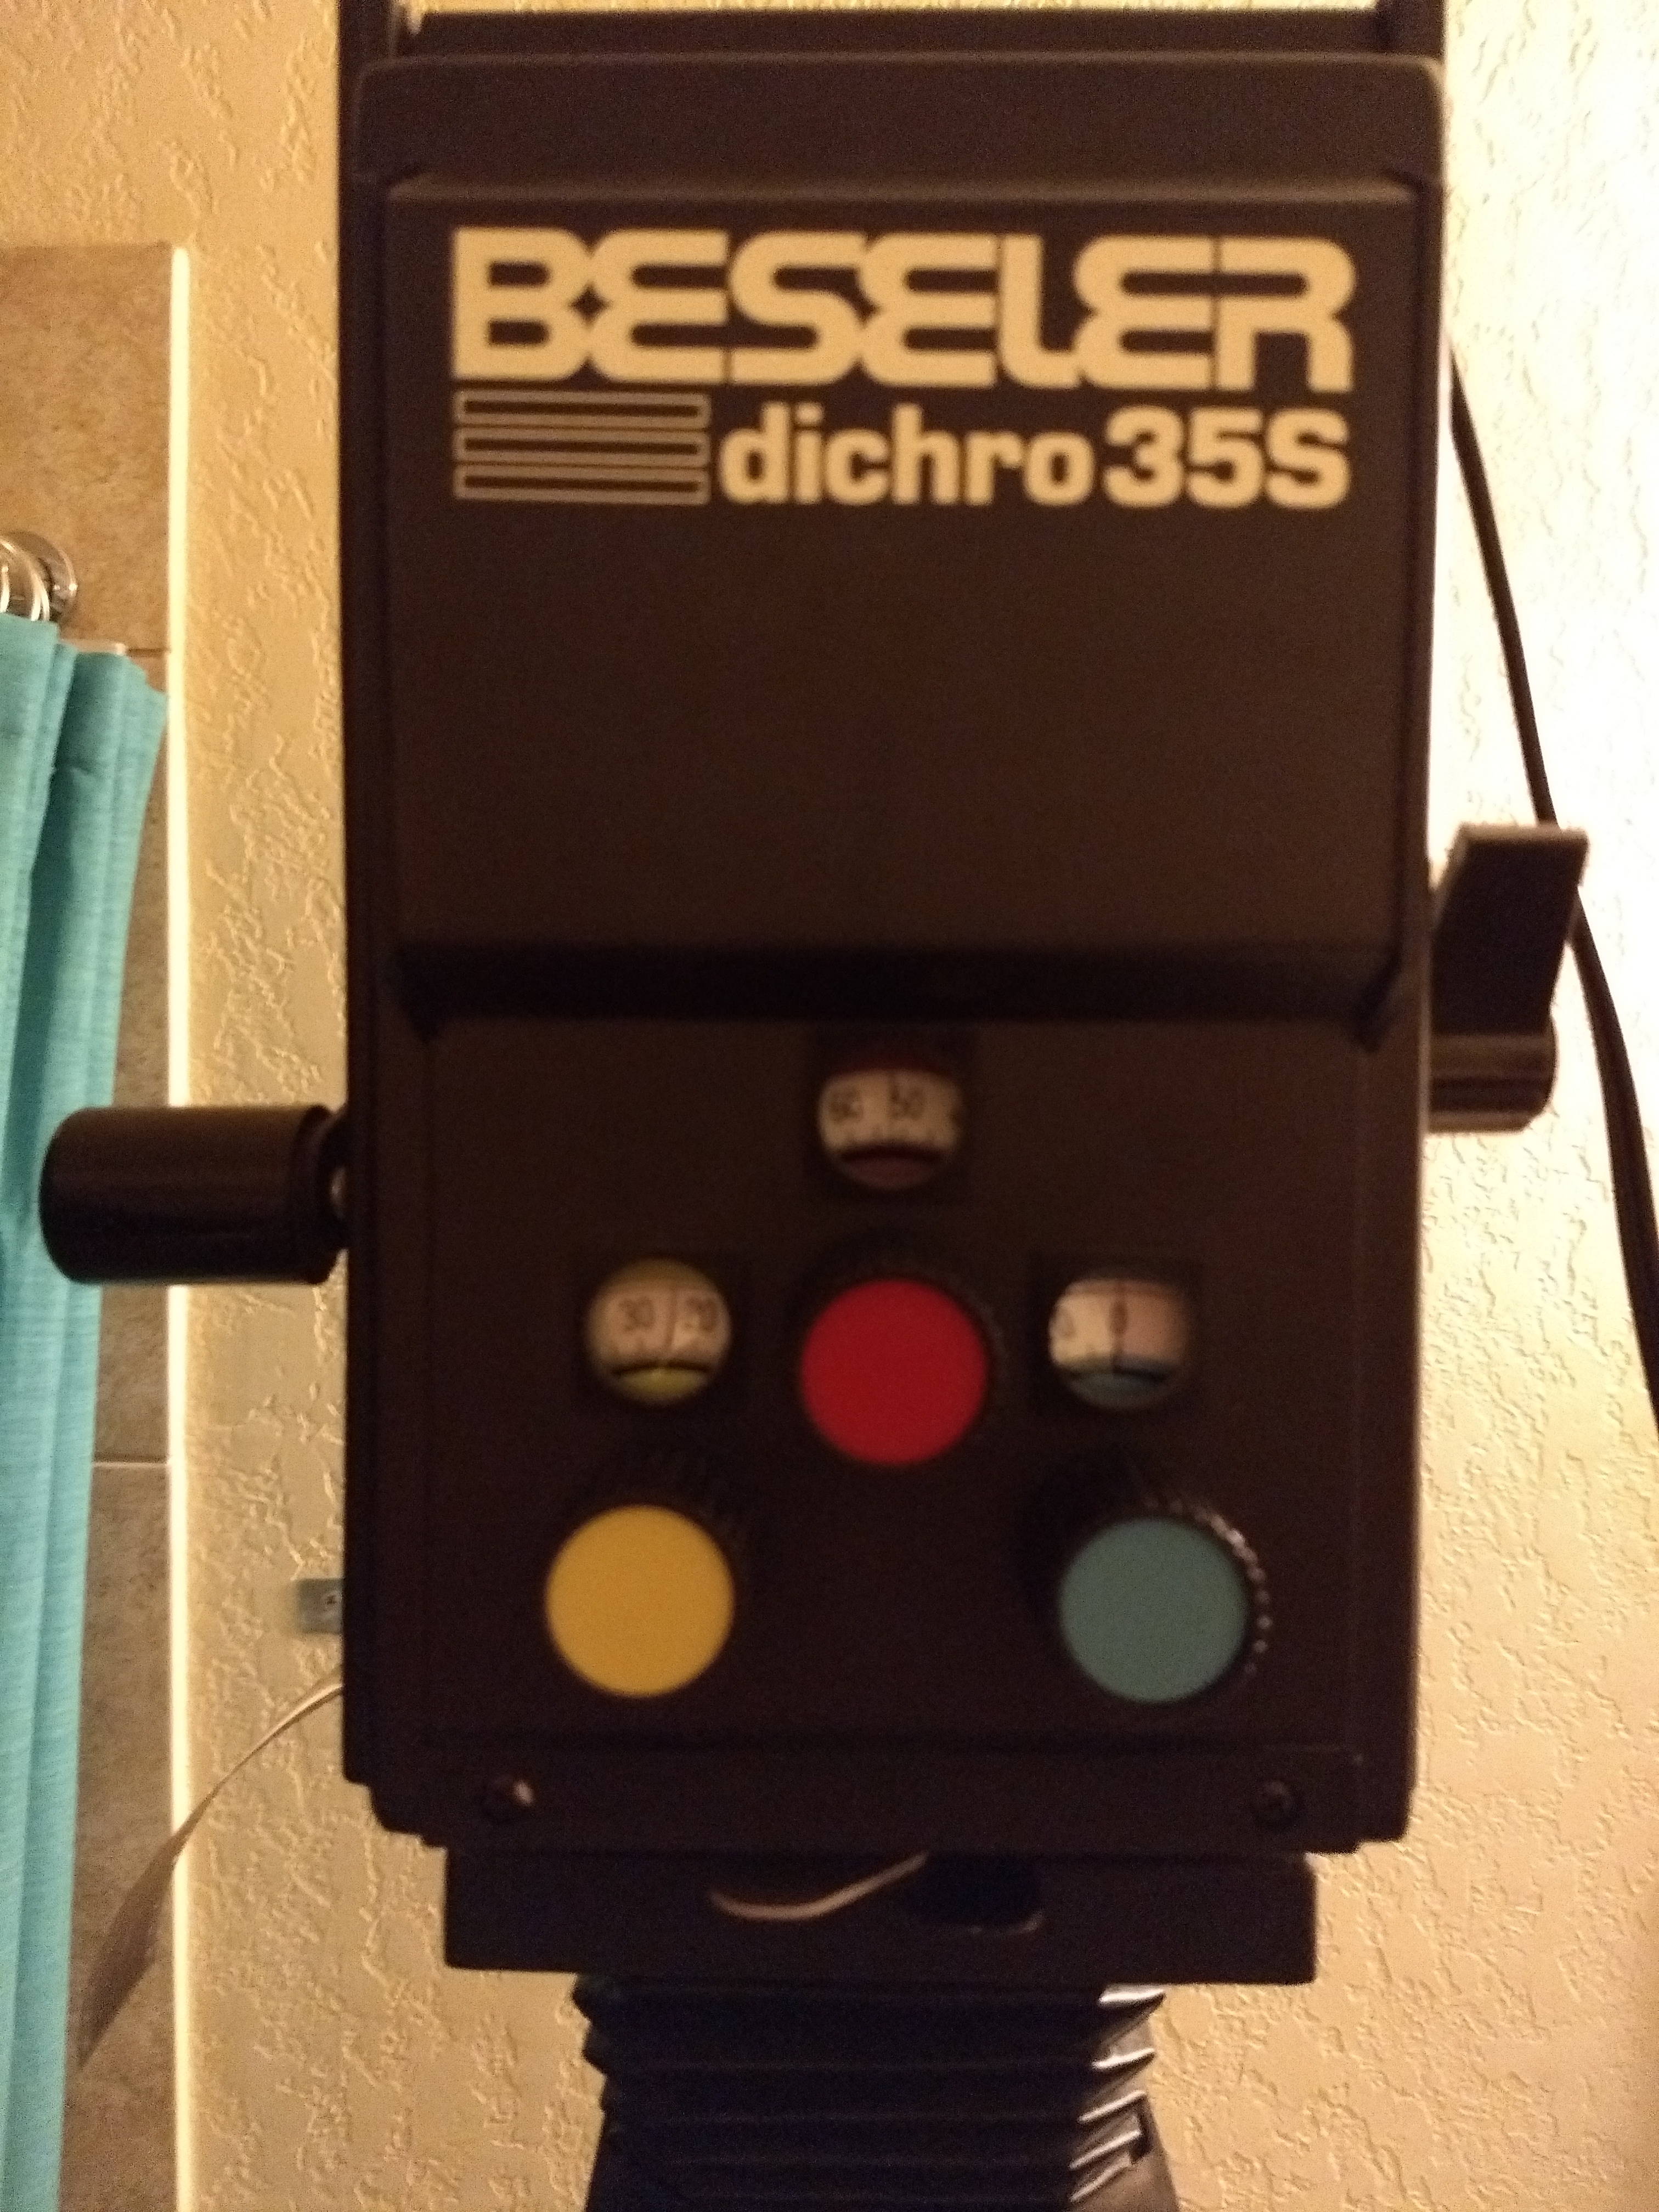 How To (Questionably) Re-align a Beseler Dichro 35s